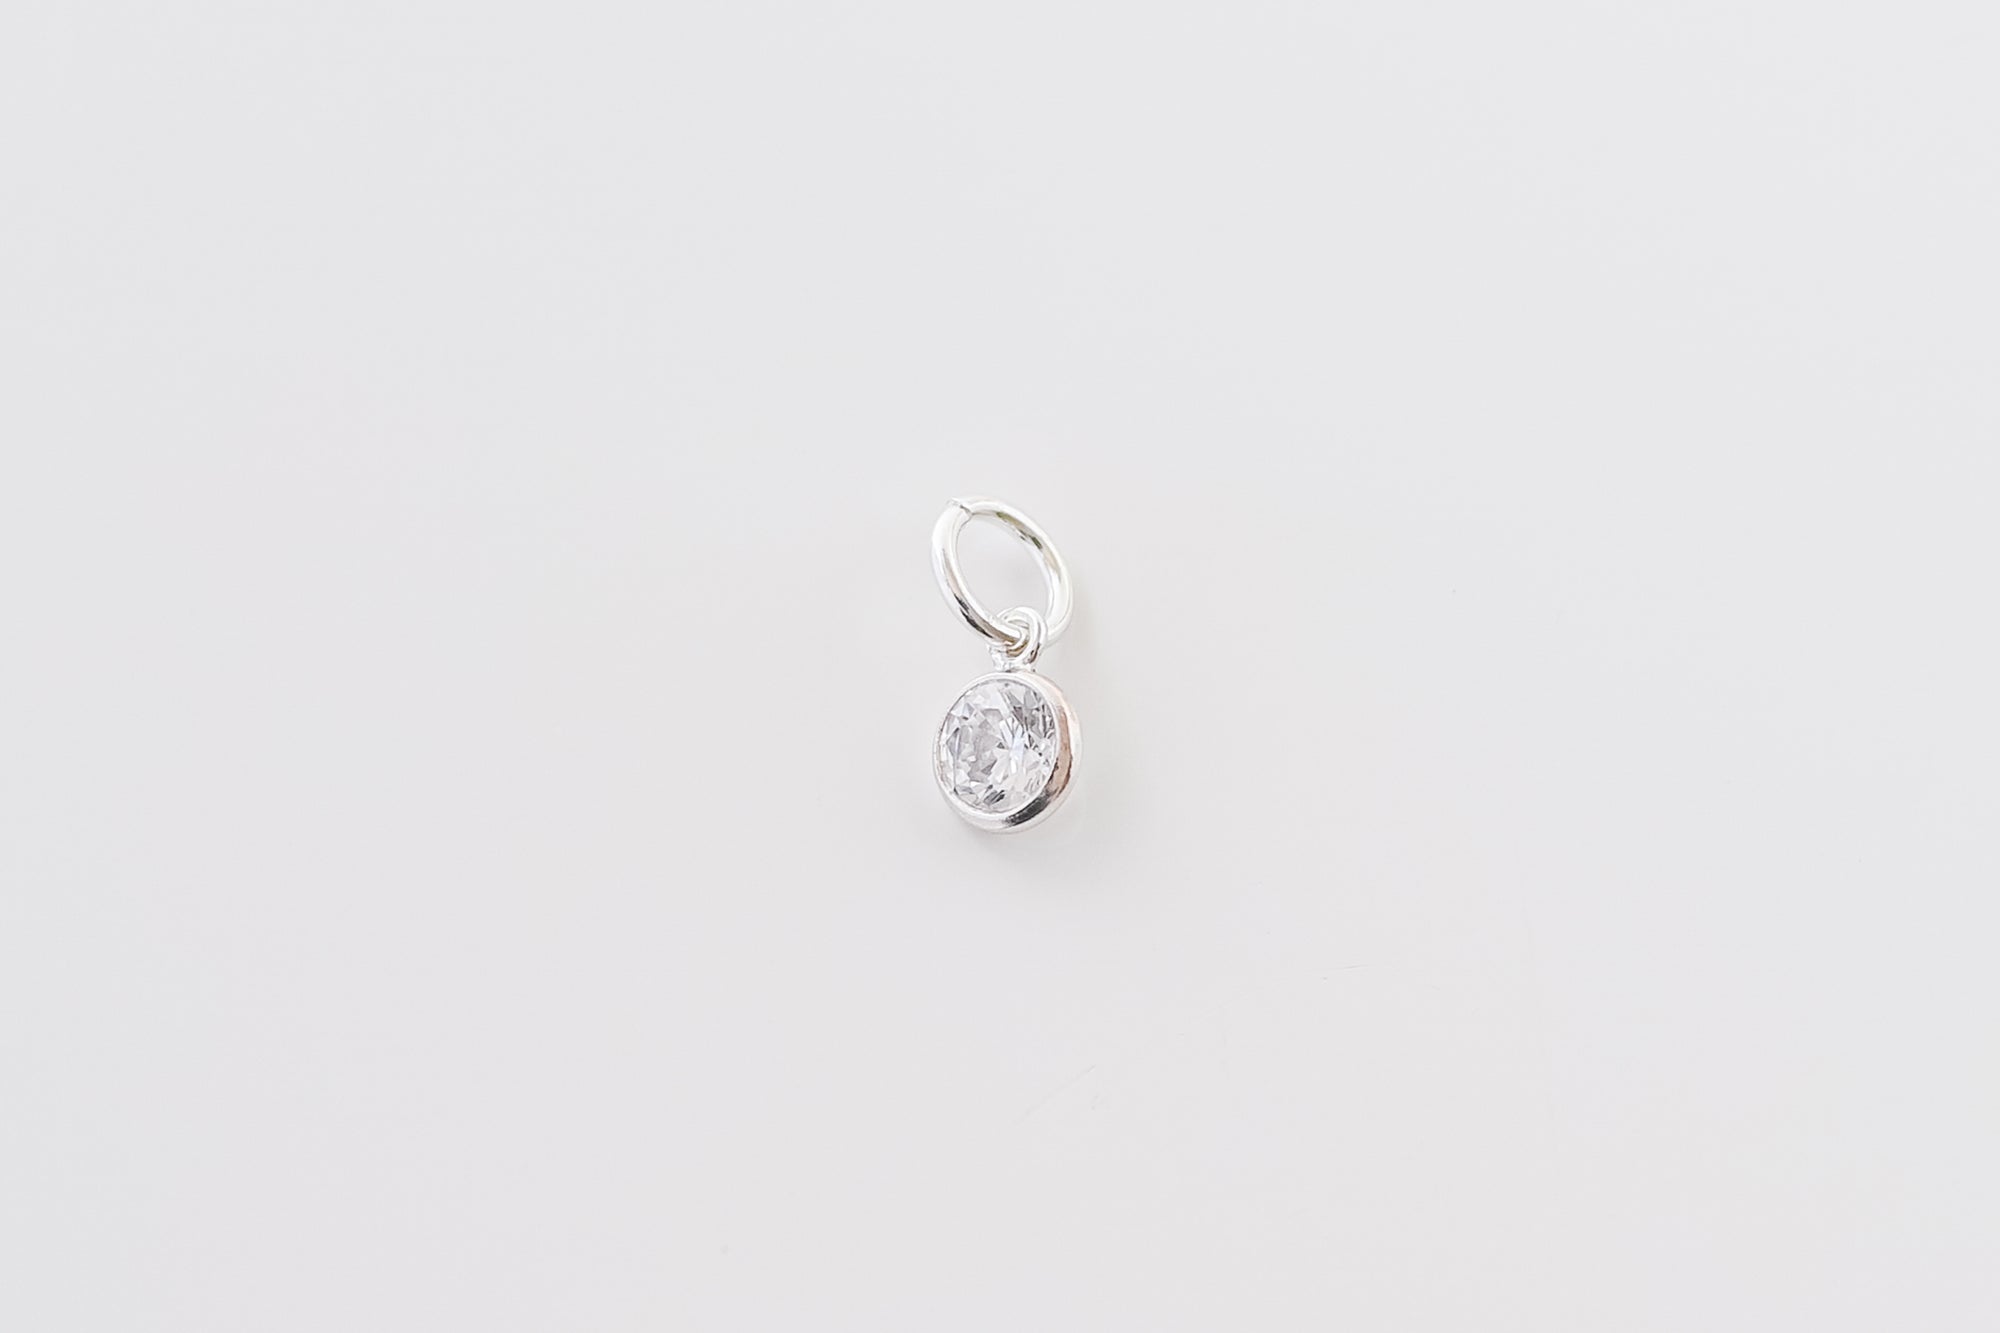 Perfect Fit Silver CZ Stone Charm